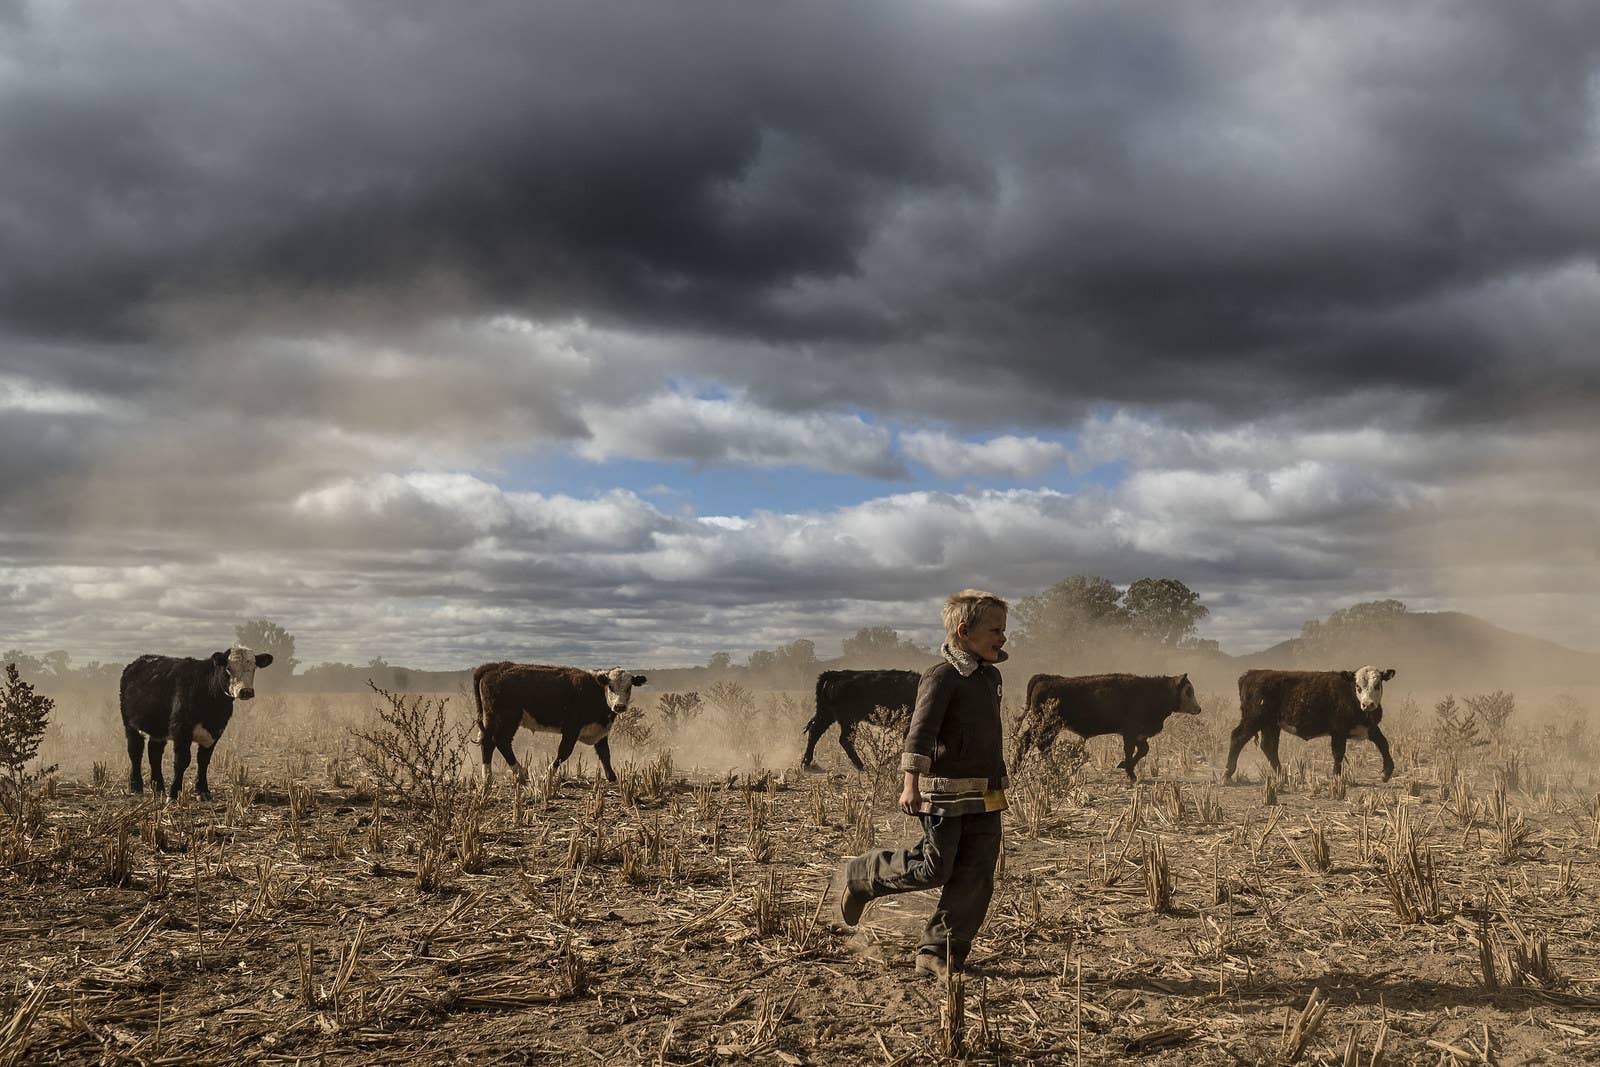 Harry Taylor, 6, plays on the dust bowl his family farm has become during the drought on June 17 in Coonabarabran, New South Wales, Australia.